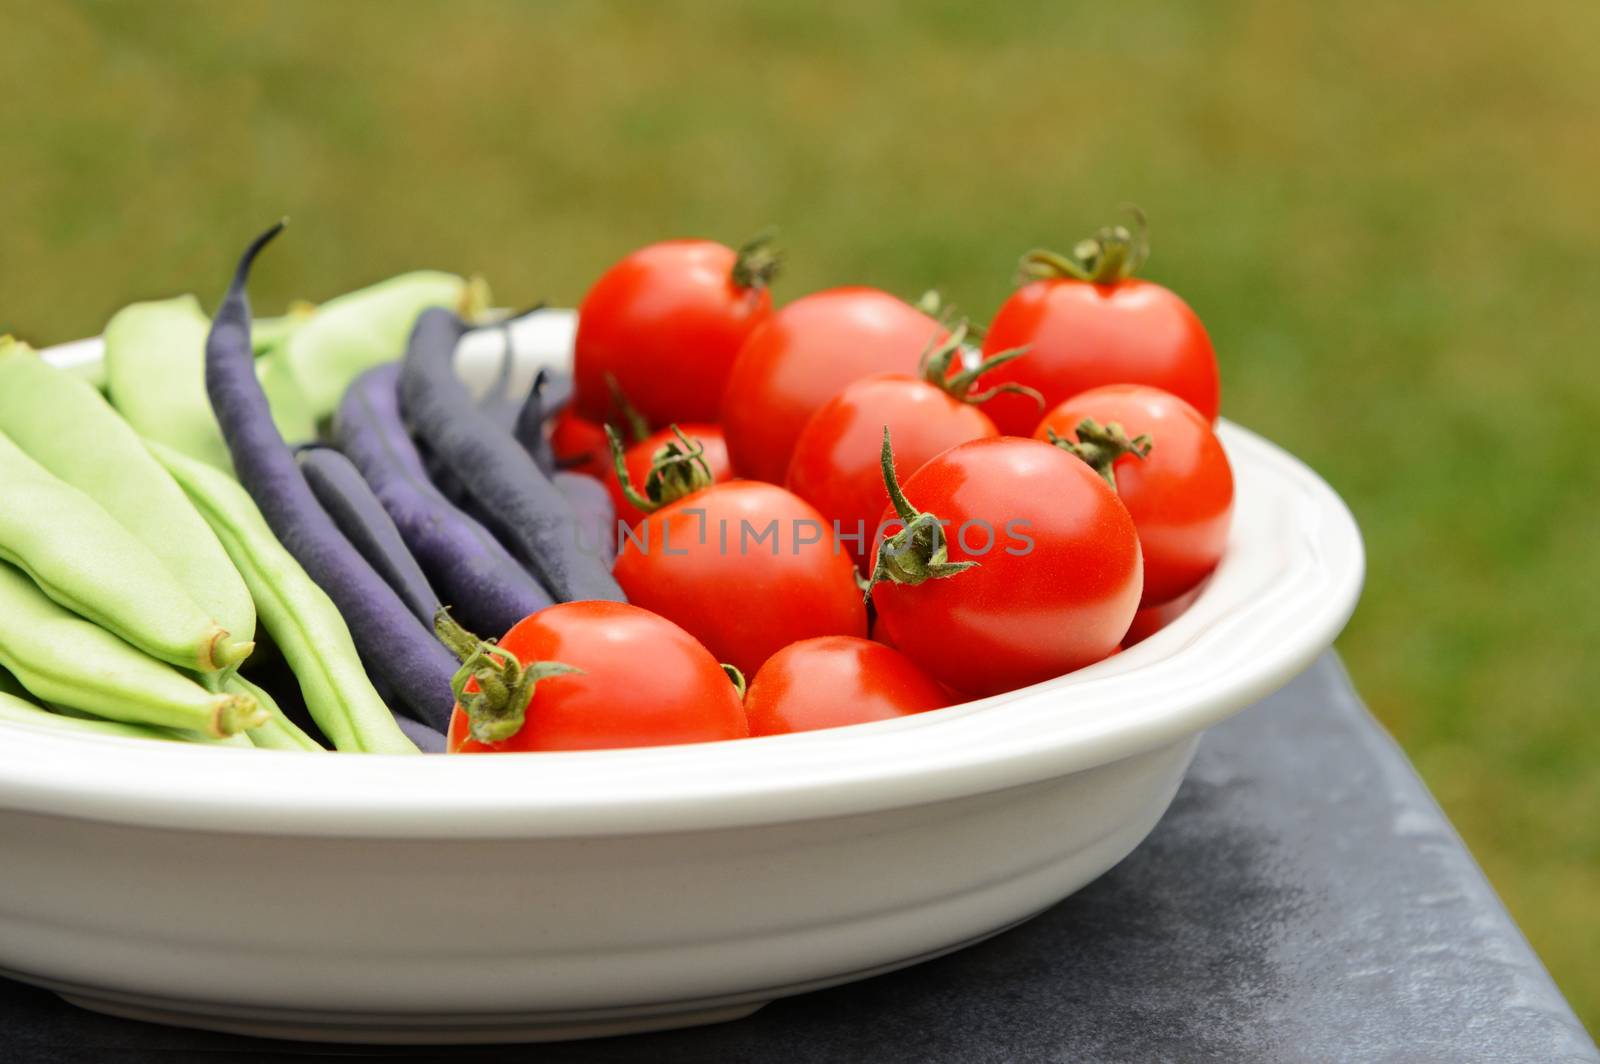 Calypso and French beans in a ceramic dish with ripe red tomatoes on a table outside